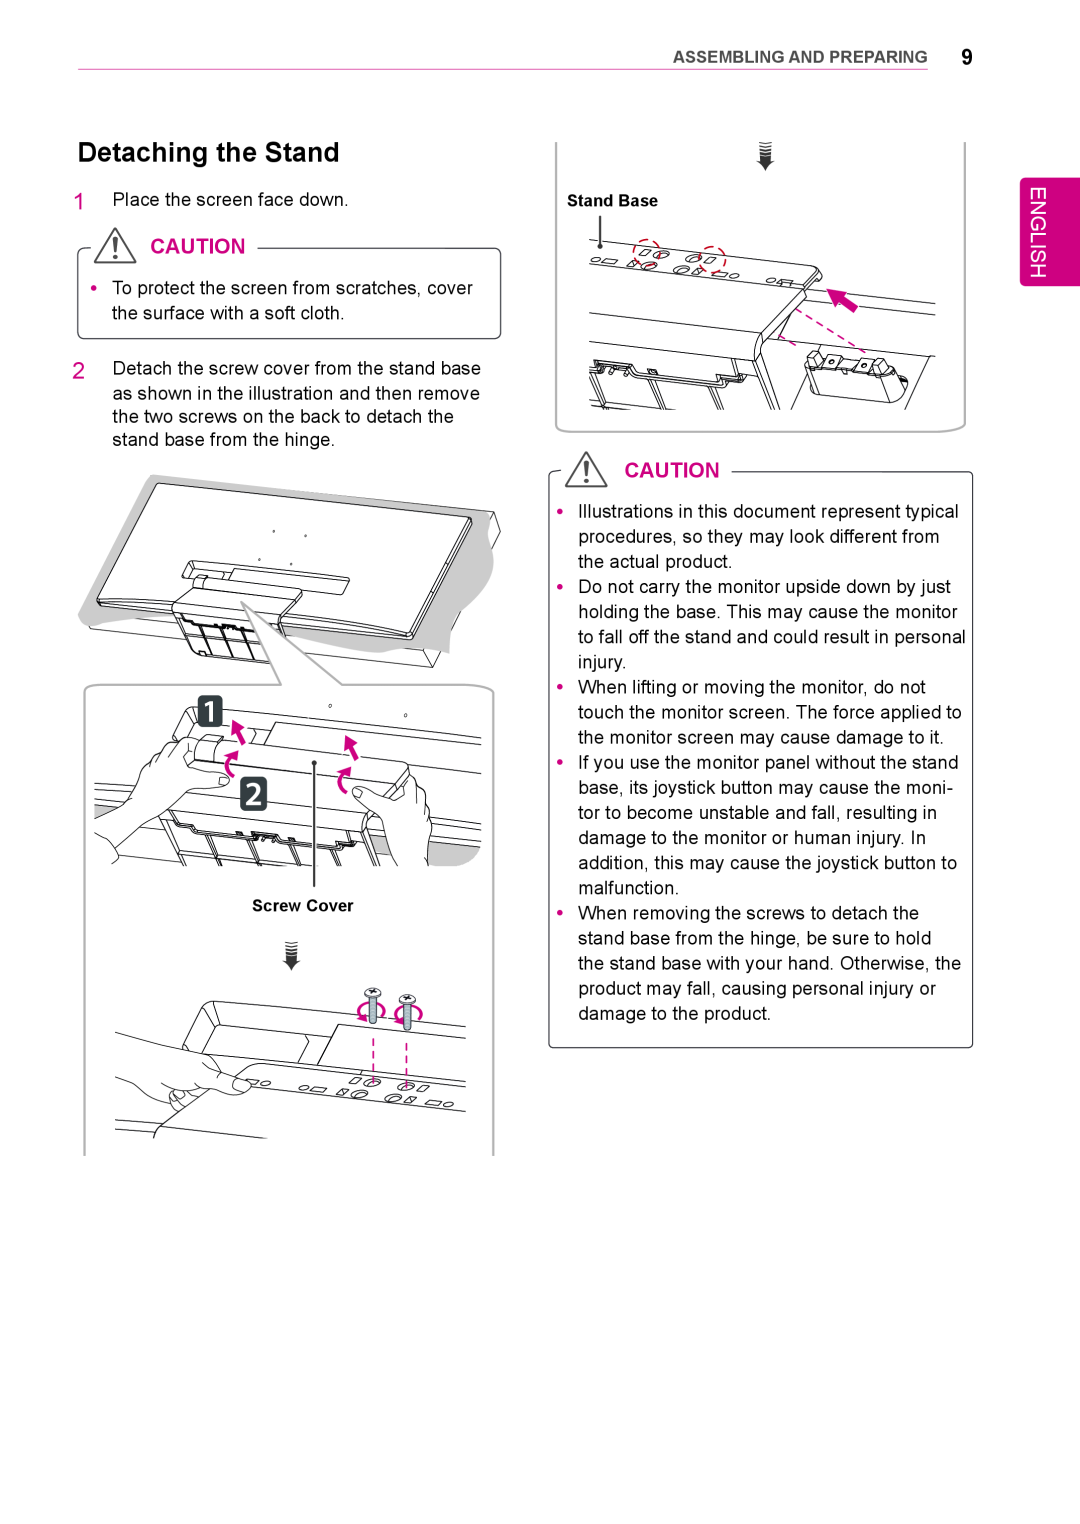 LG Electronics 34UM95-PD/ 34UM95-PE / 34UM94-PD owner manual Detaching the Stand, English, Place the screen face down 